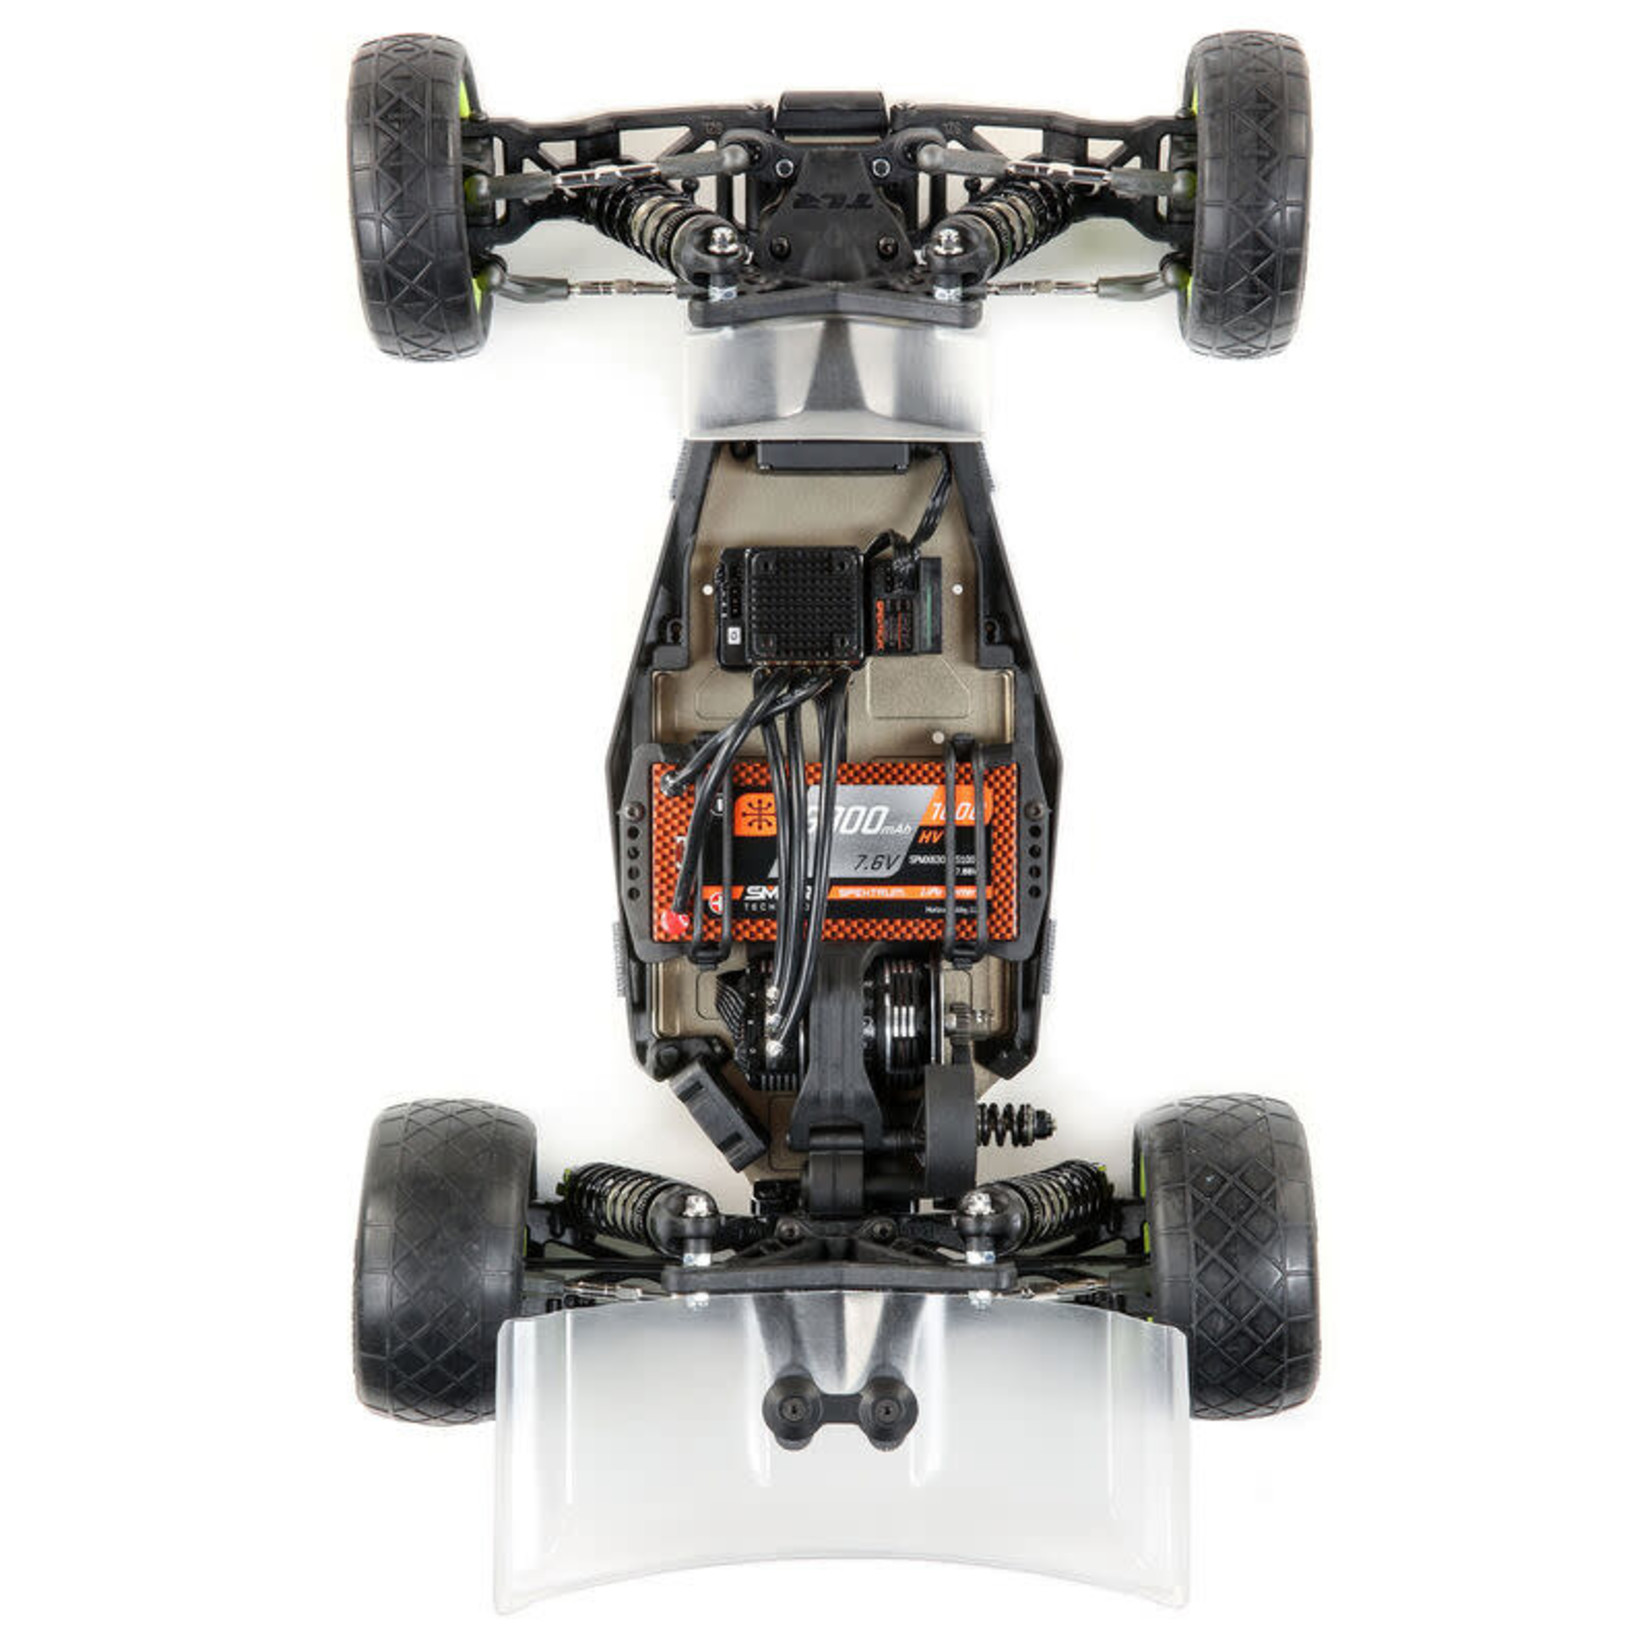 TLR 1/10 22 5.0 DC Race Roller 2WD Buggy, Dirt/Clay